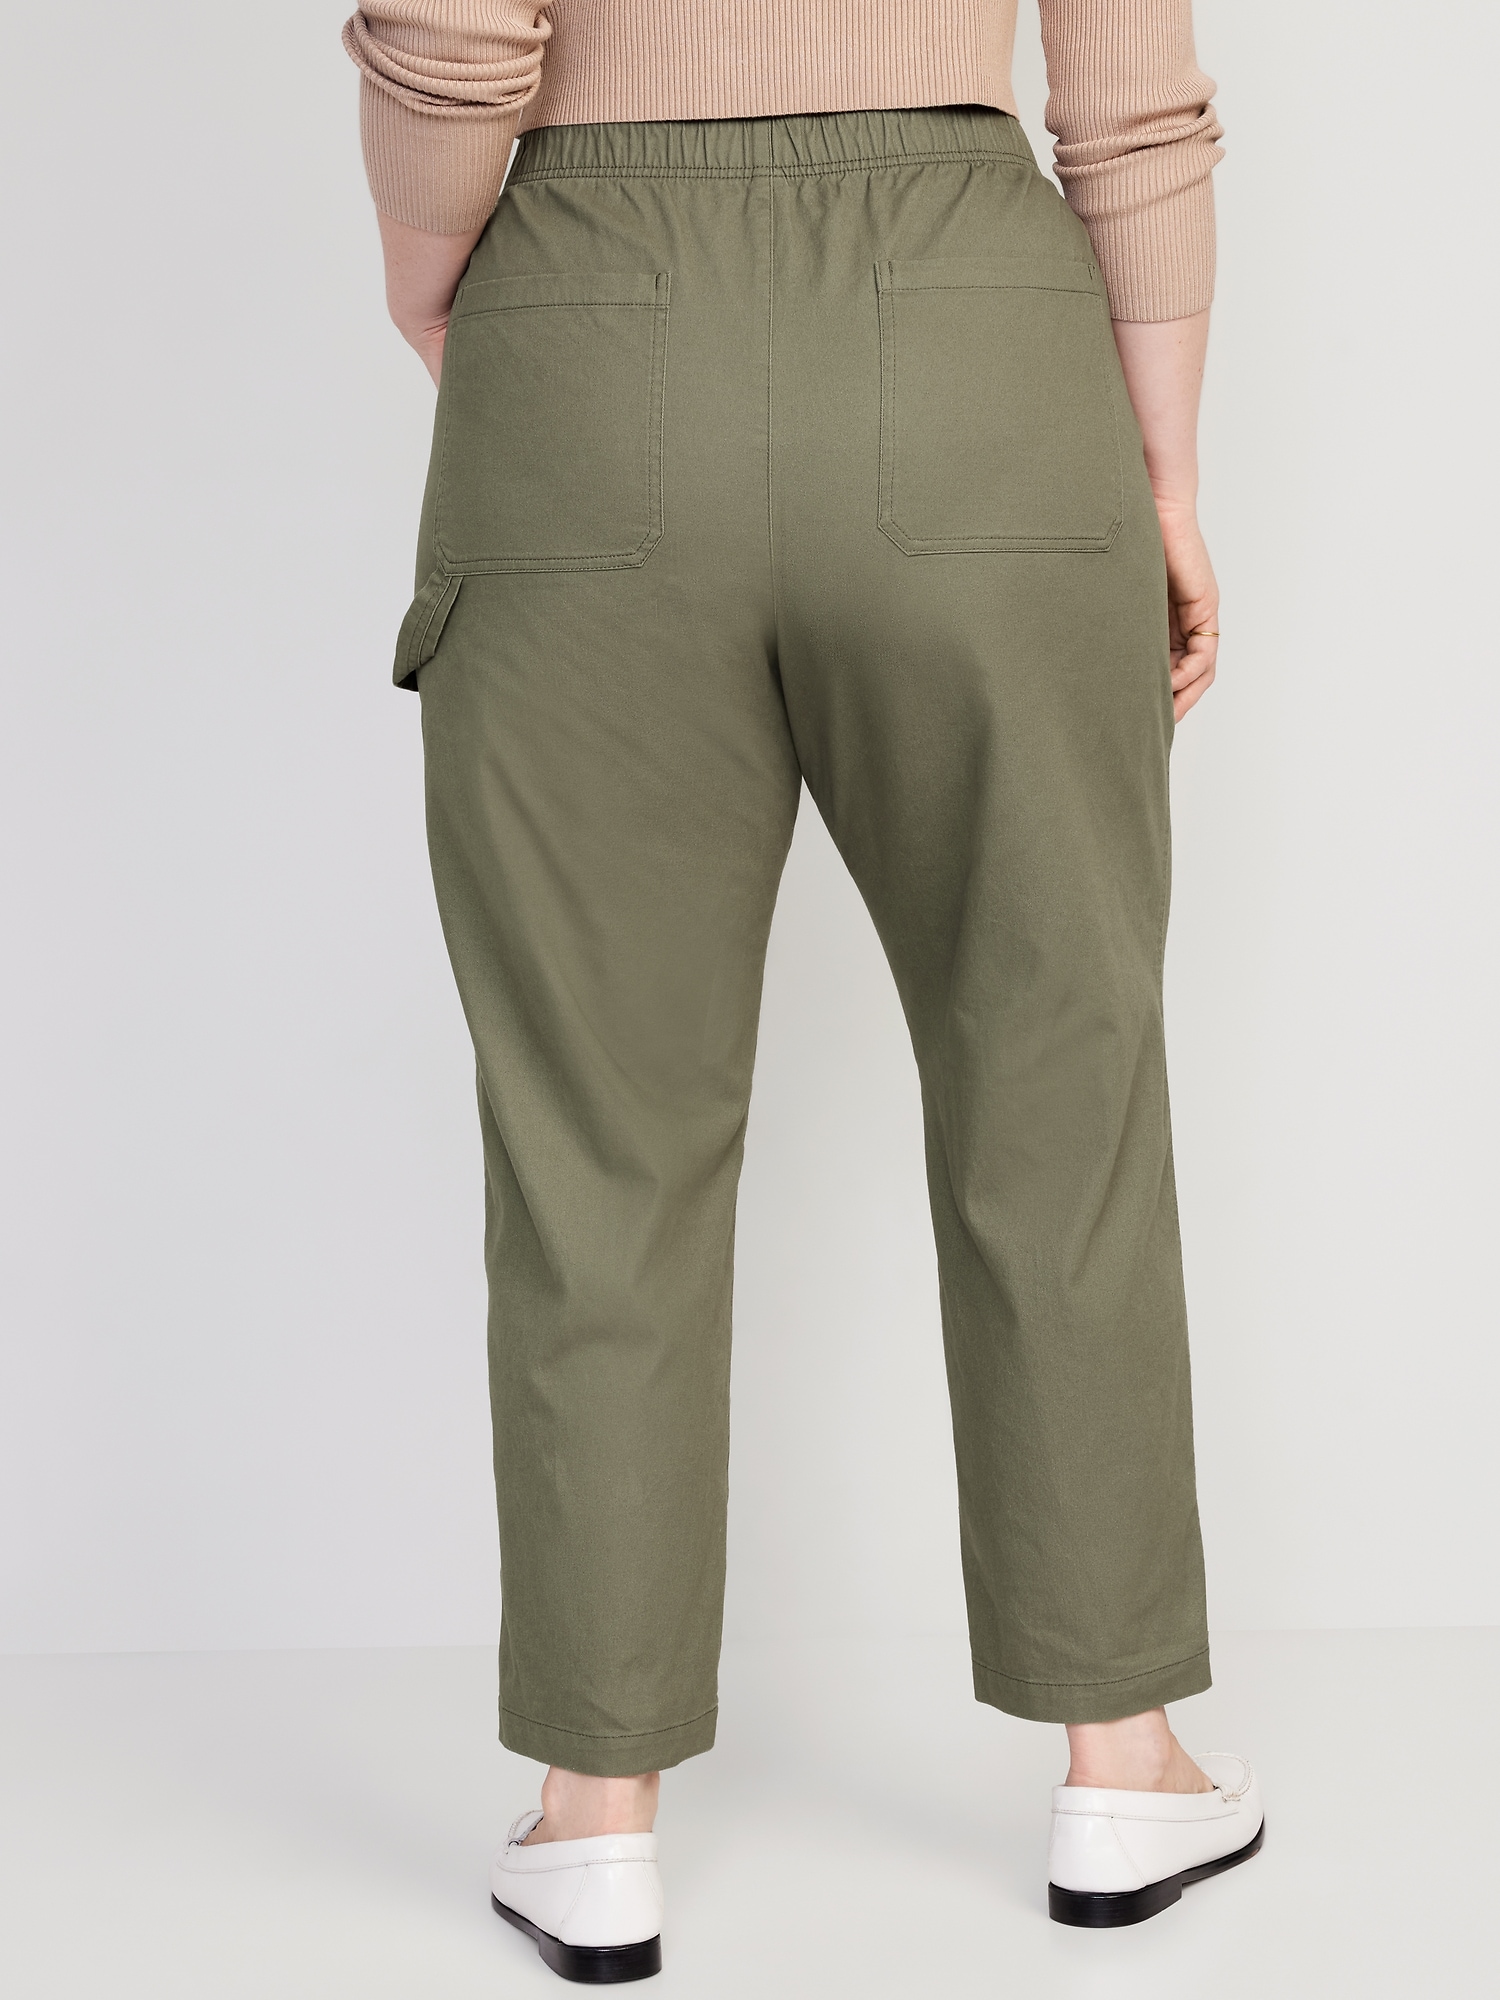 Womens Stretch Cargo Pants With Pockets Utility Elasticated High